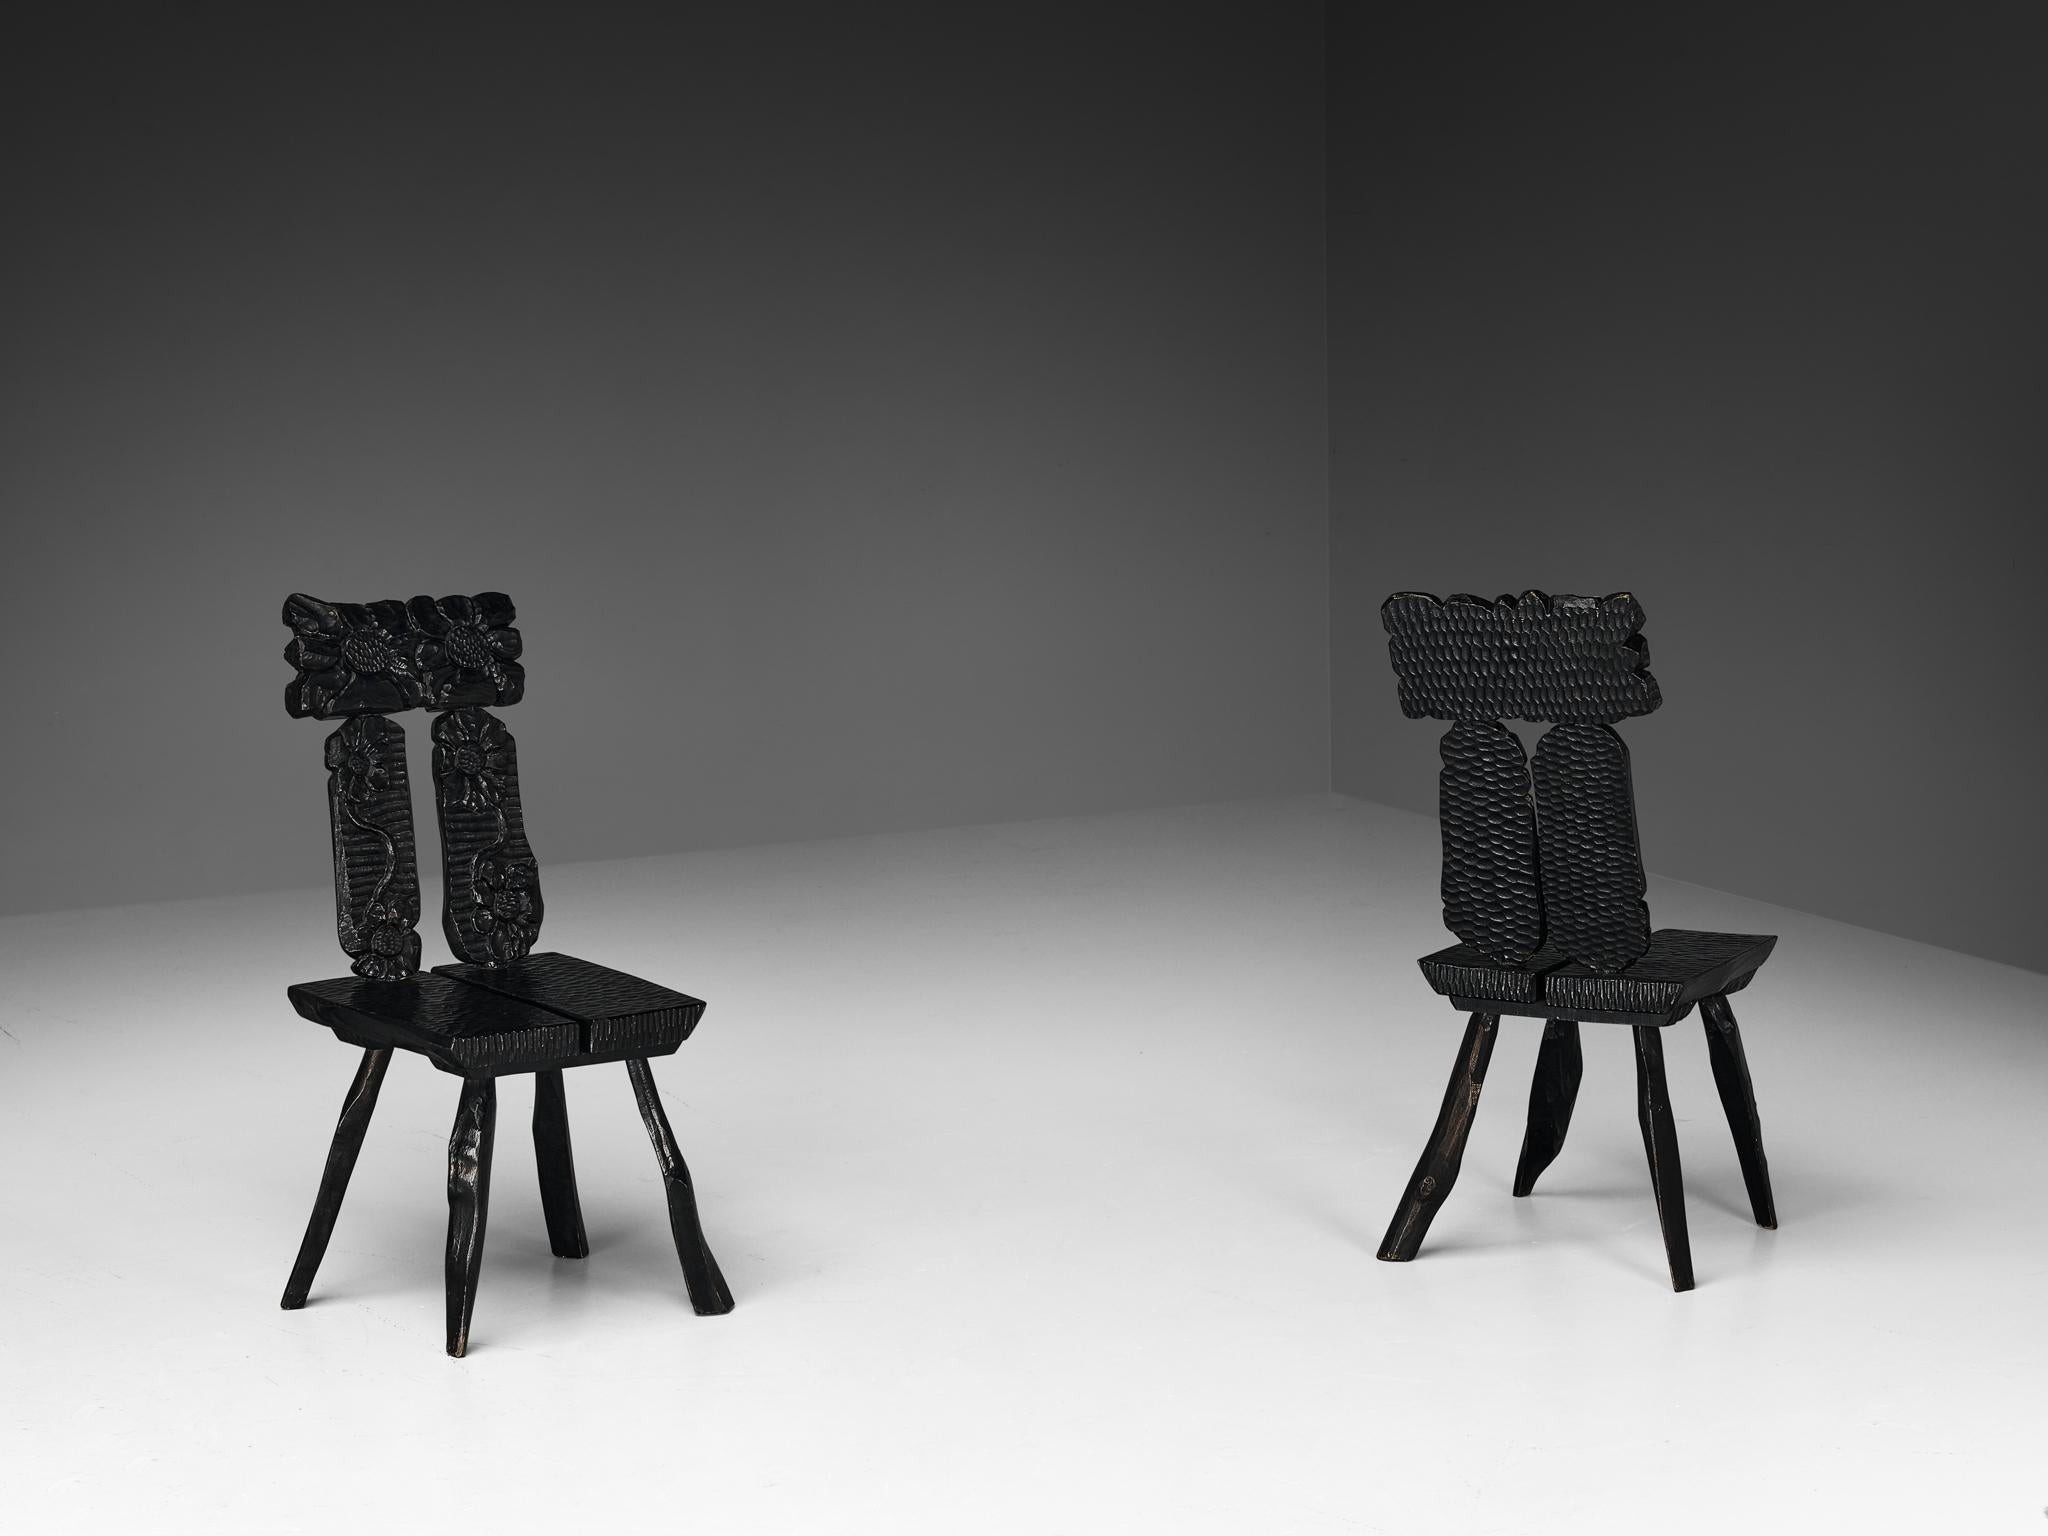 Sculptural Dining Chairs in Black Lacquered Wood with Decorative Carvings  For Sale 4